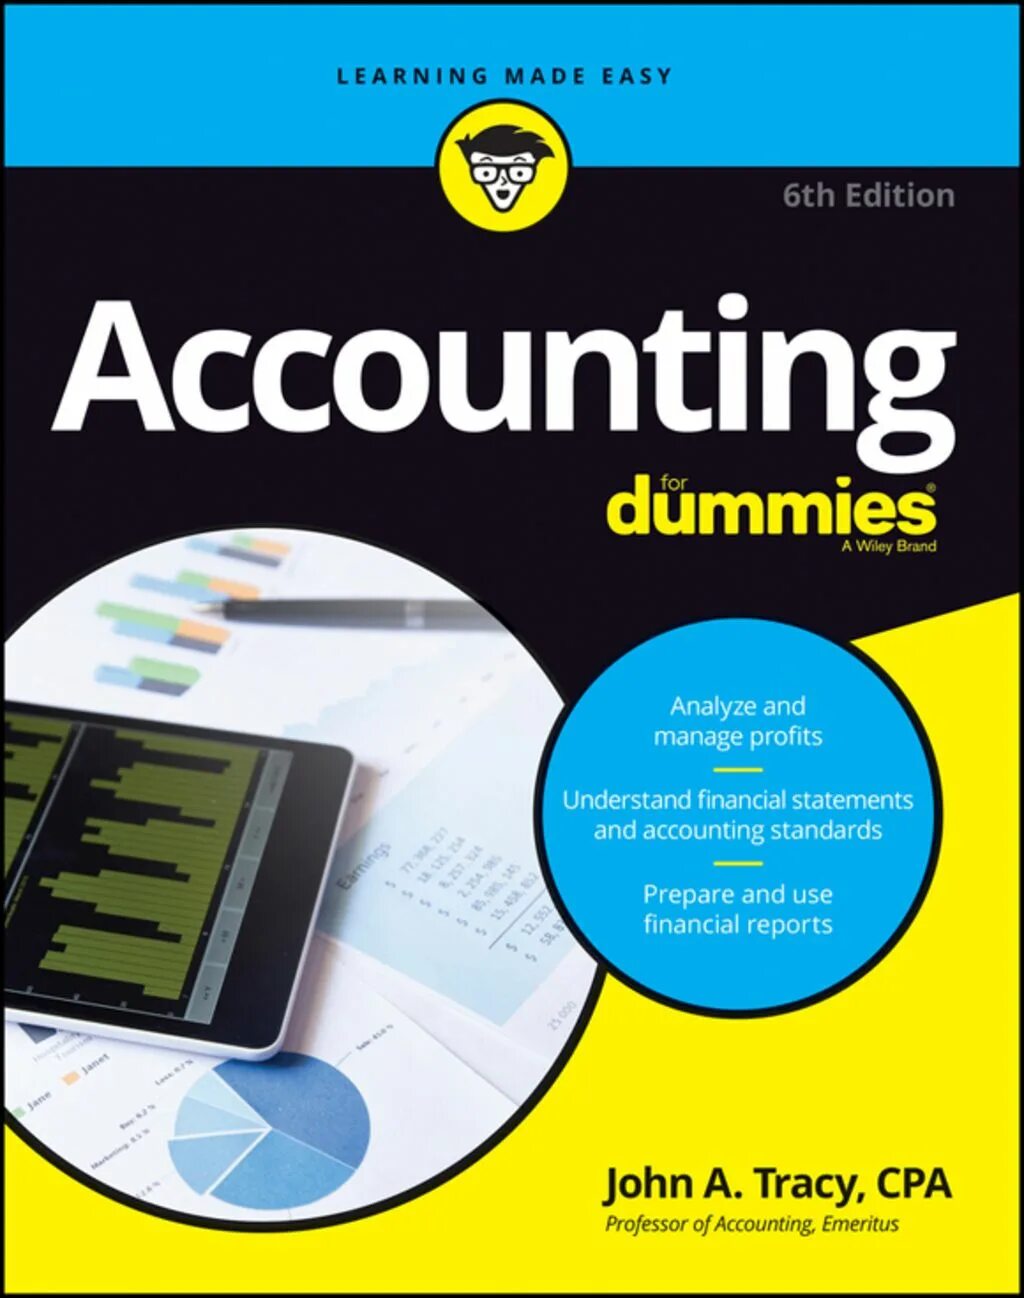 Accounting book. Accounting for Dummies. Accounting books. Financial Accounting books. Account book.